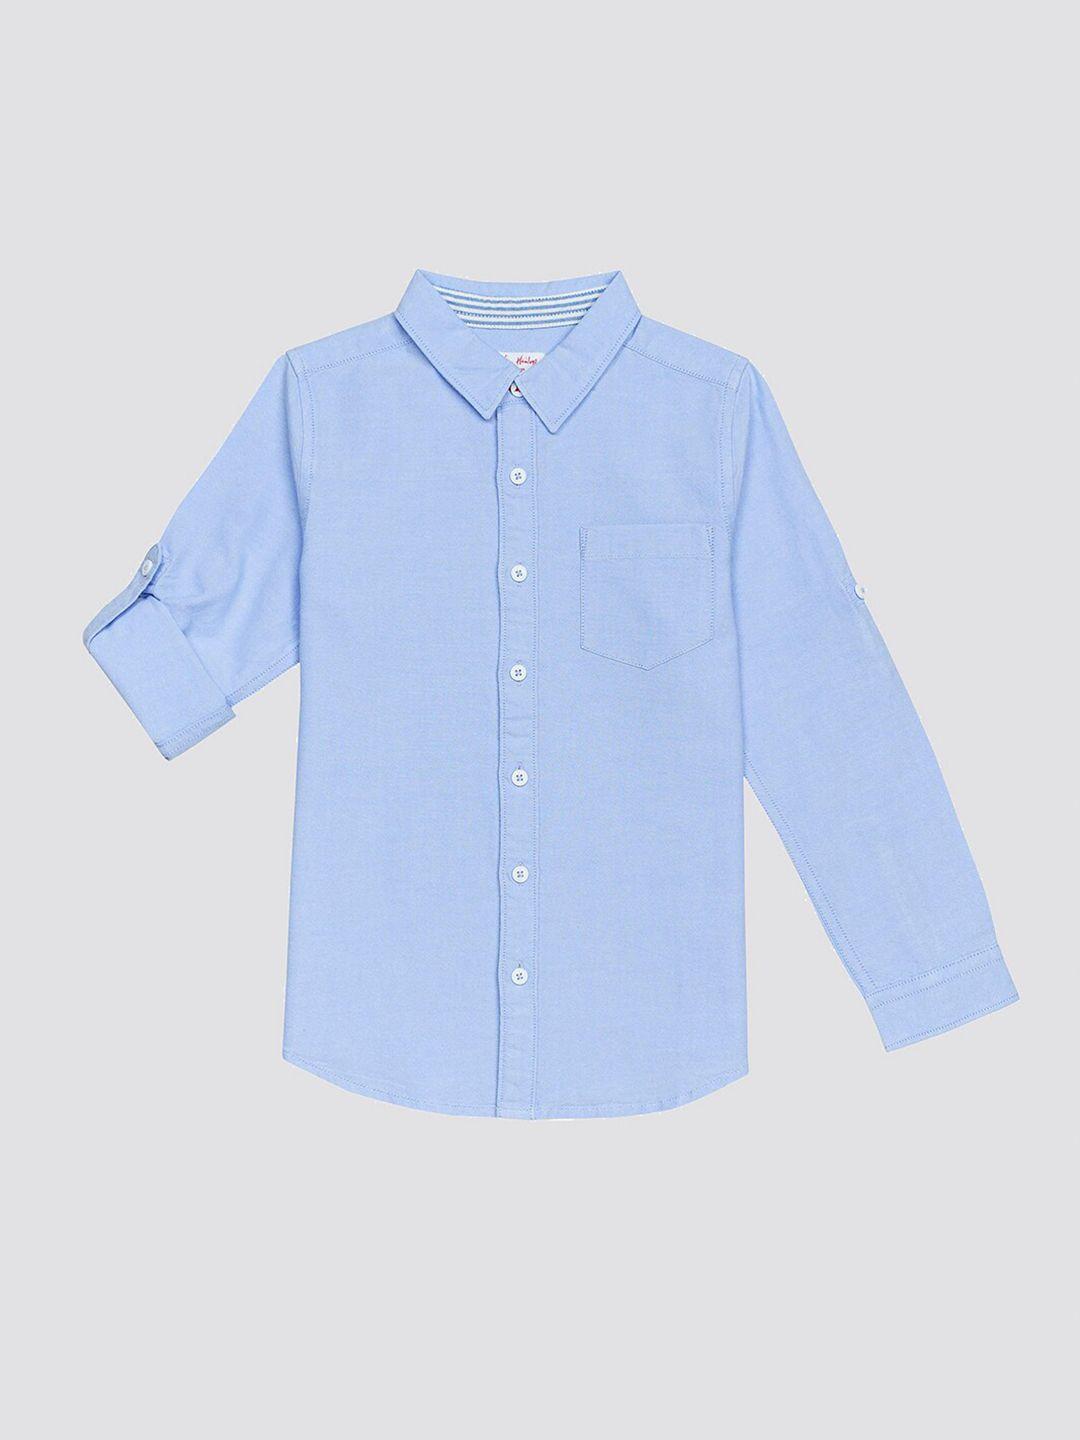 h by hamleys boys spread collar roll-up sleeves pure cotton casual shirt